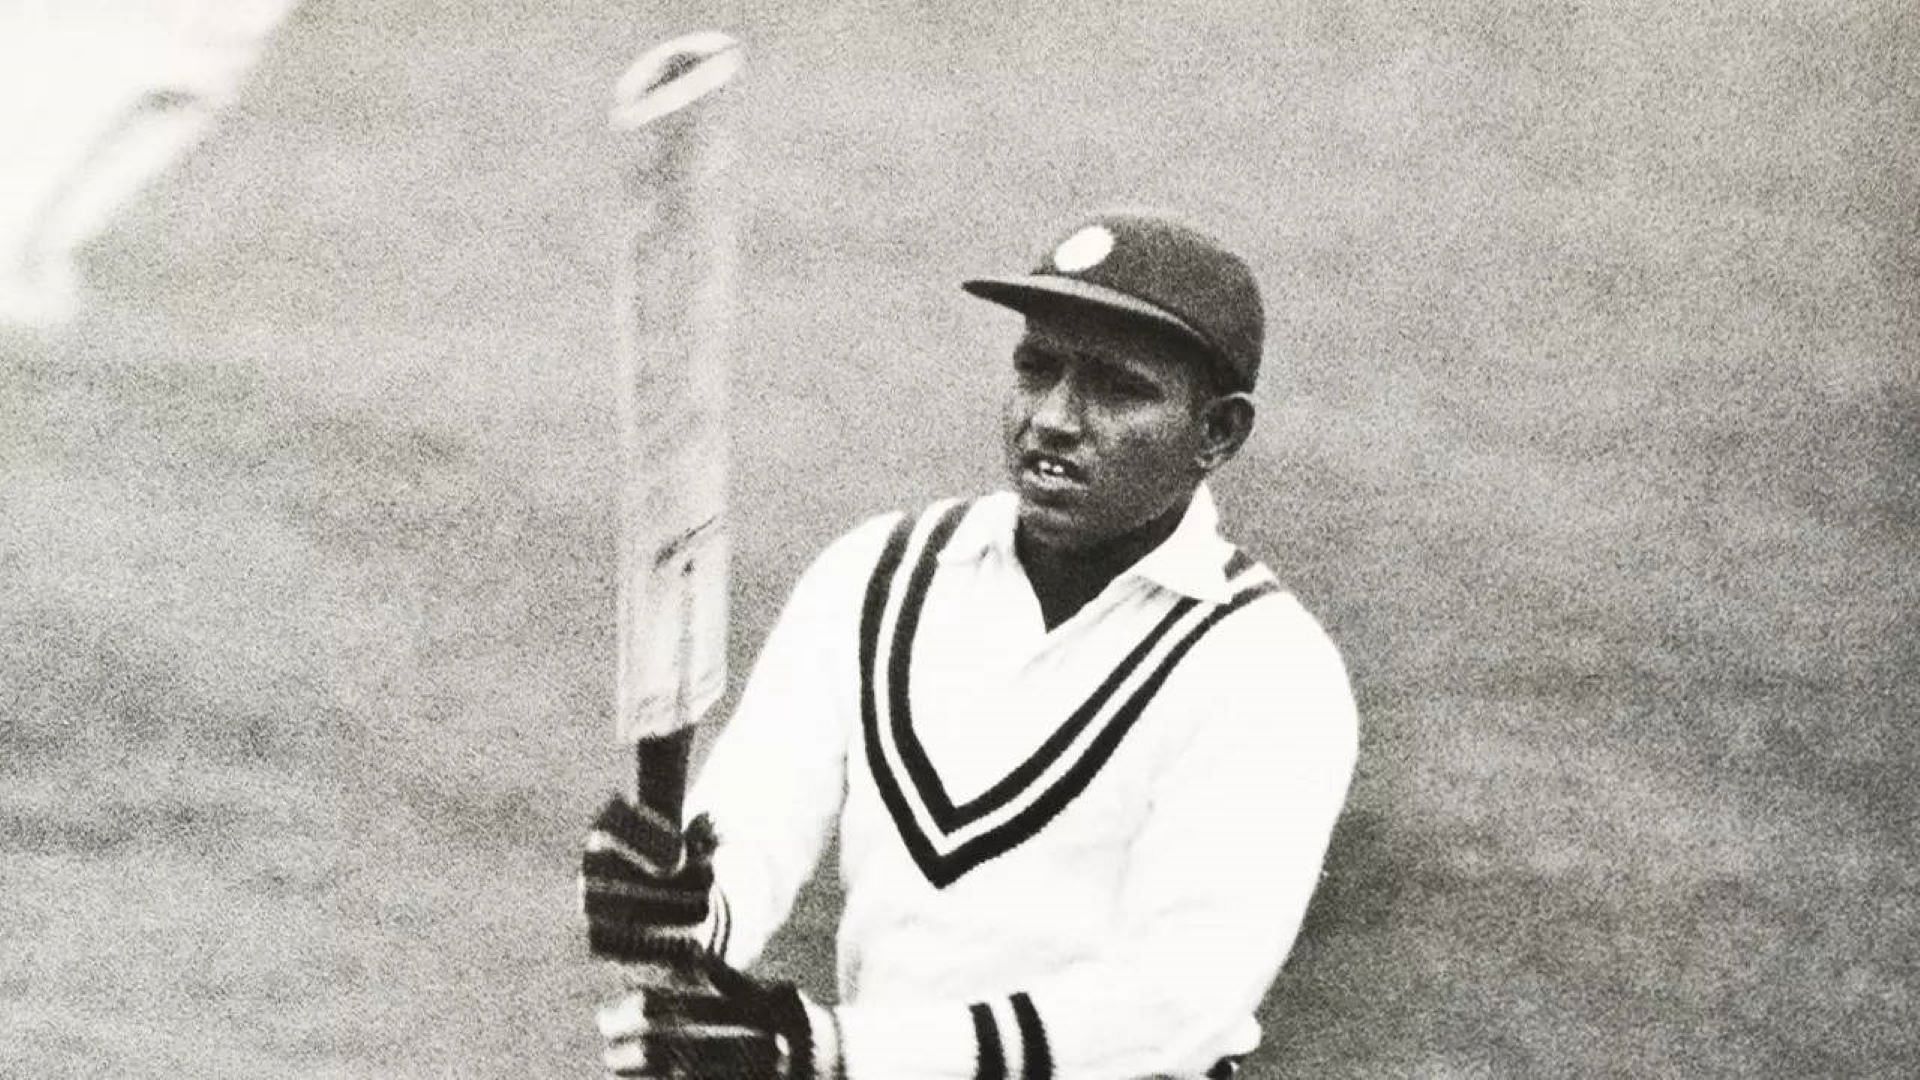 Lala Amarnath was one of the father figures of Indian cricket